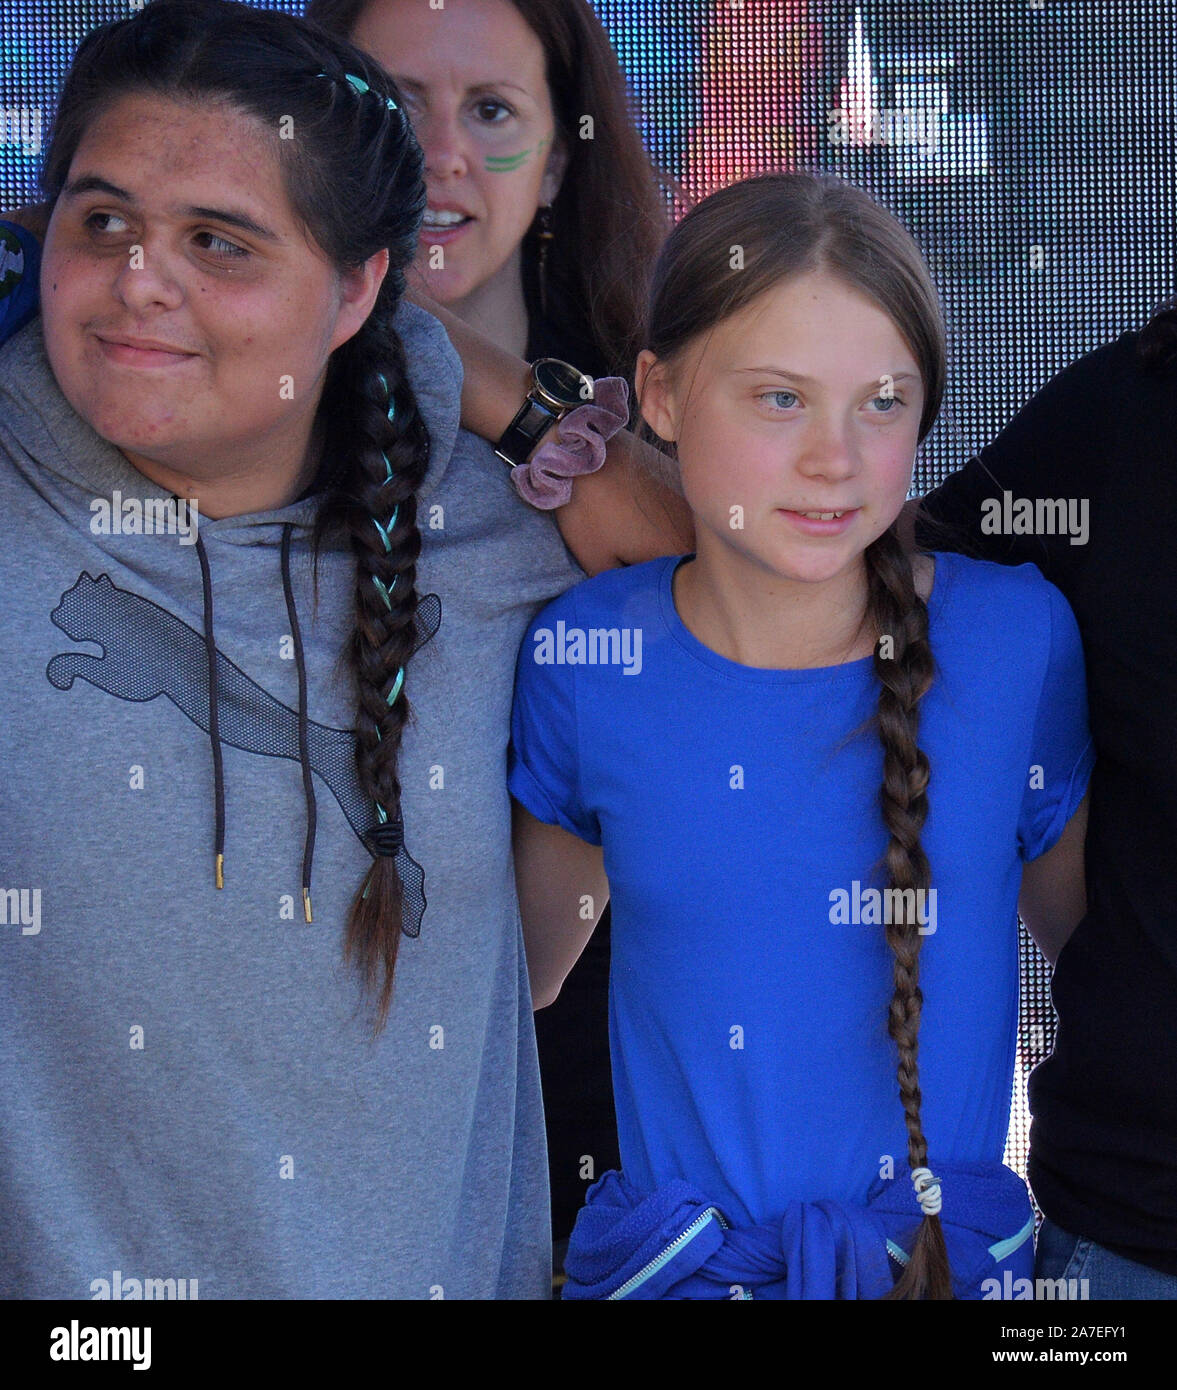 Los Angeles, USA. 1st Nov 2019. Swedish teen climate activist Greta Thunberg appears on stage with organizers of Youth Climate Strike Los Angeles, joining with protesters in a demonstration outside Los Angeles City Hall to protest fossil fuel production in California on Friday, November 1, 2019. Thunberg, 16, said her generation has a responsibility to demand from.elected officials environmental policy reforms that ban oil and gas drilling, from which carbon emissions have been identified as a primary source of the planet's annual rising temperatures. Credit: UPI/Alamy Live News Stock Photo